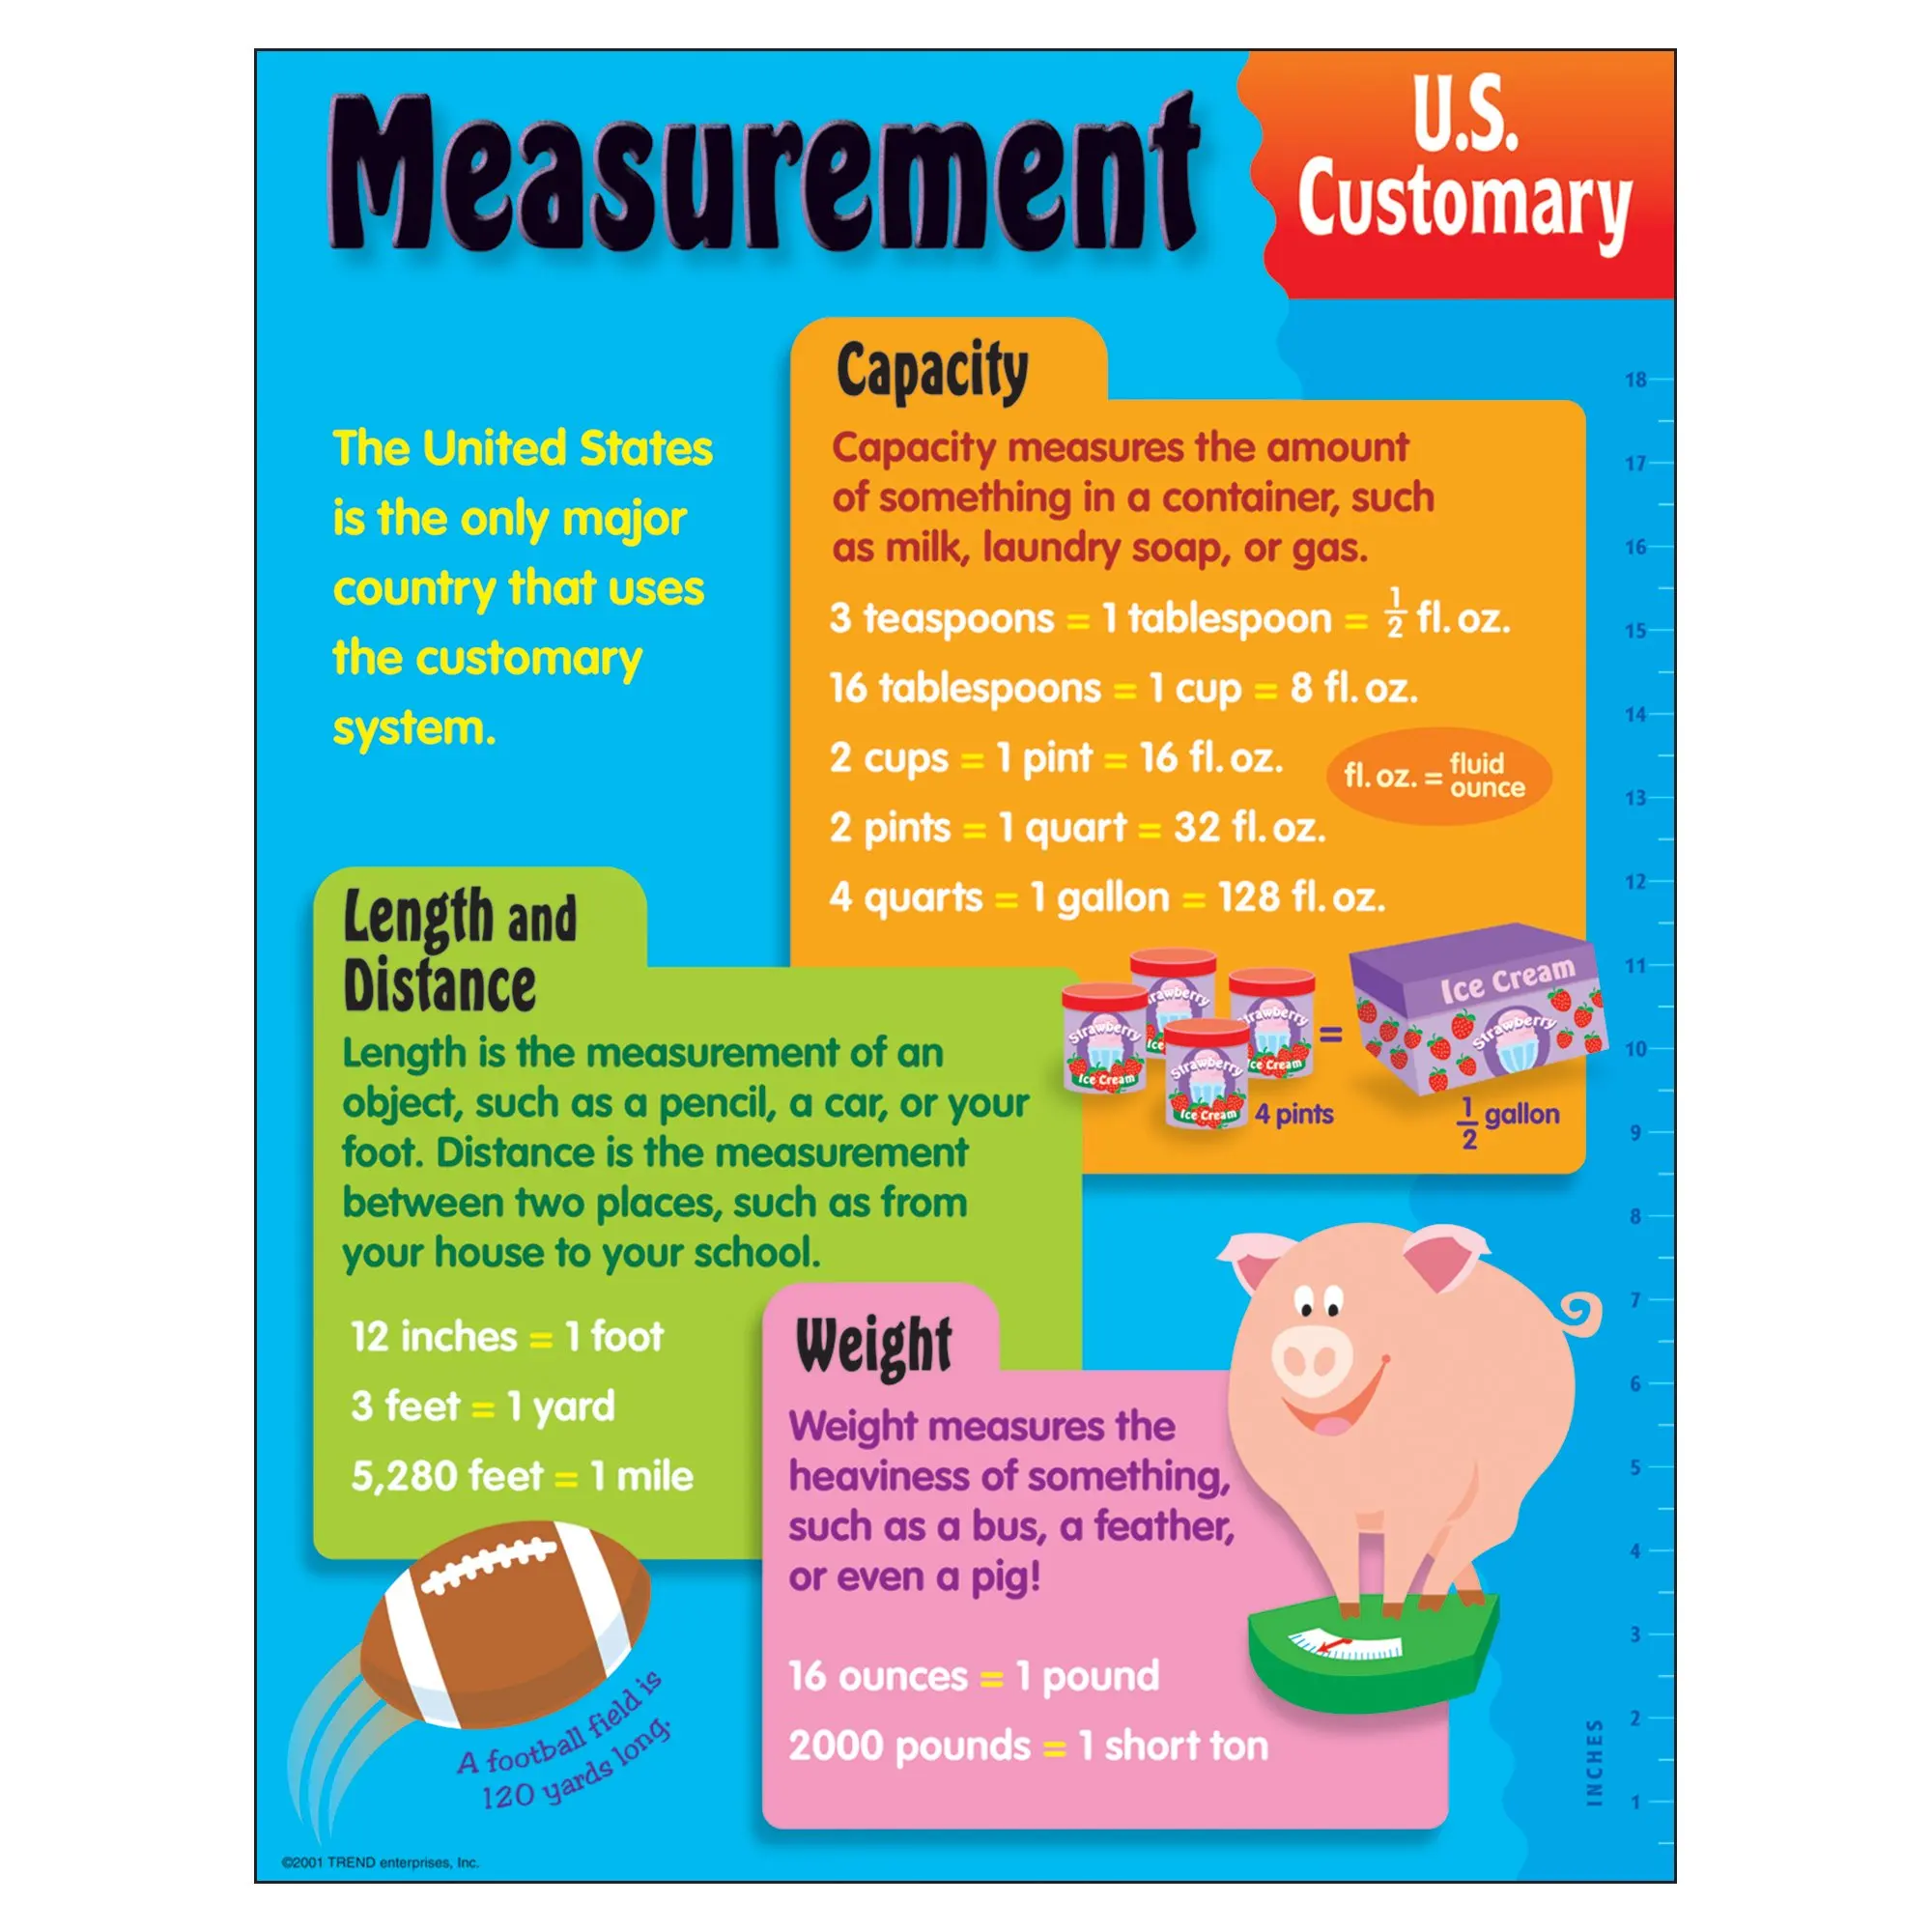 cheap-customary-and-metric-units-of-measurement-chart-find-customary-and-metric-units-of